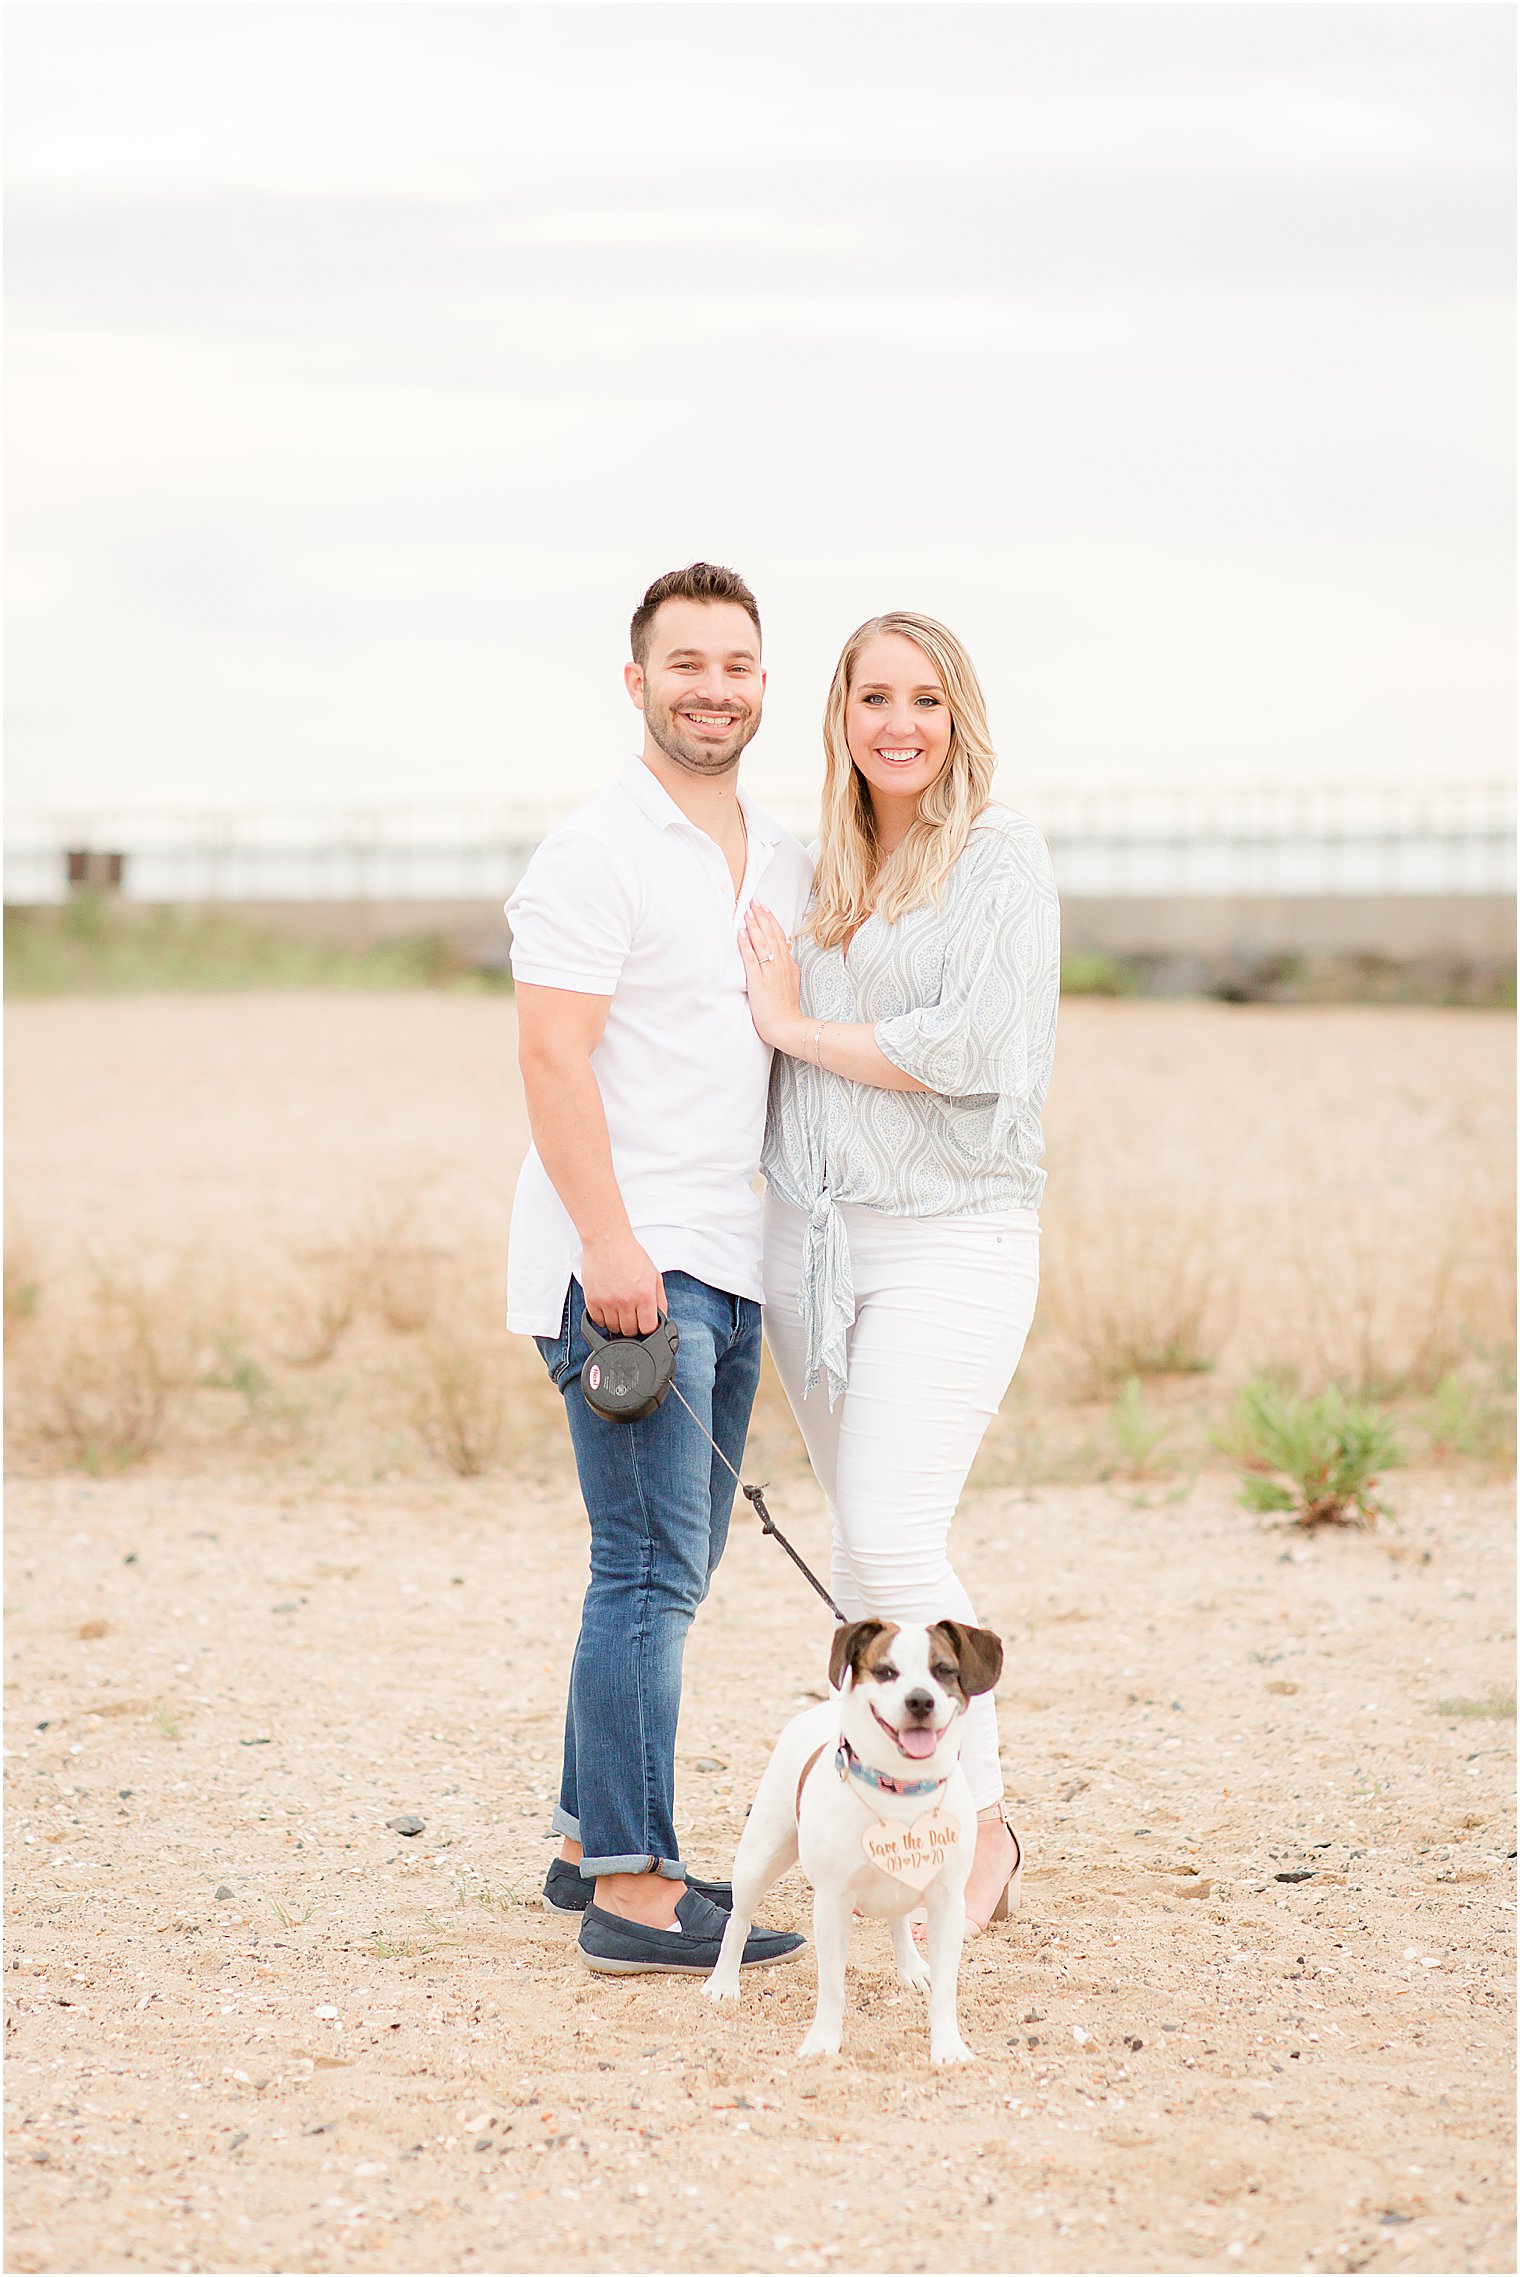 New Jersey couple stands with dog on leash during engagement photos